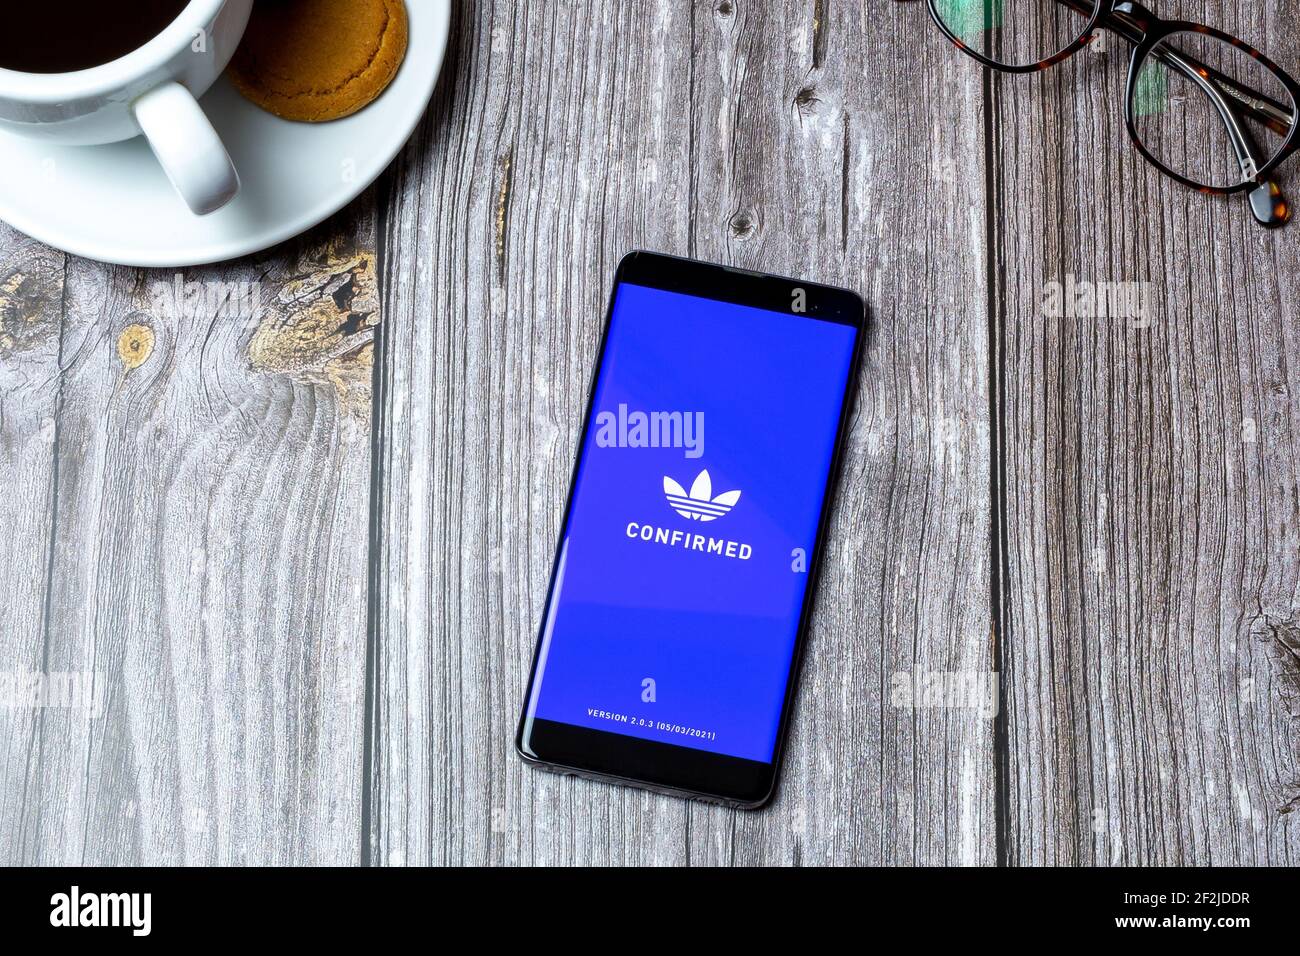 A Mobile phone or cell phone laid on a wooden table with the Adidas Confirmed app open on screen Stock Photo